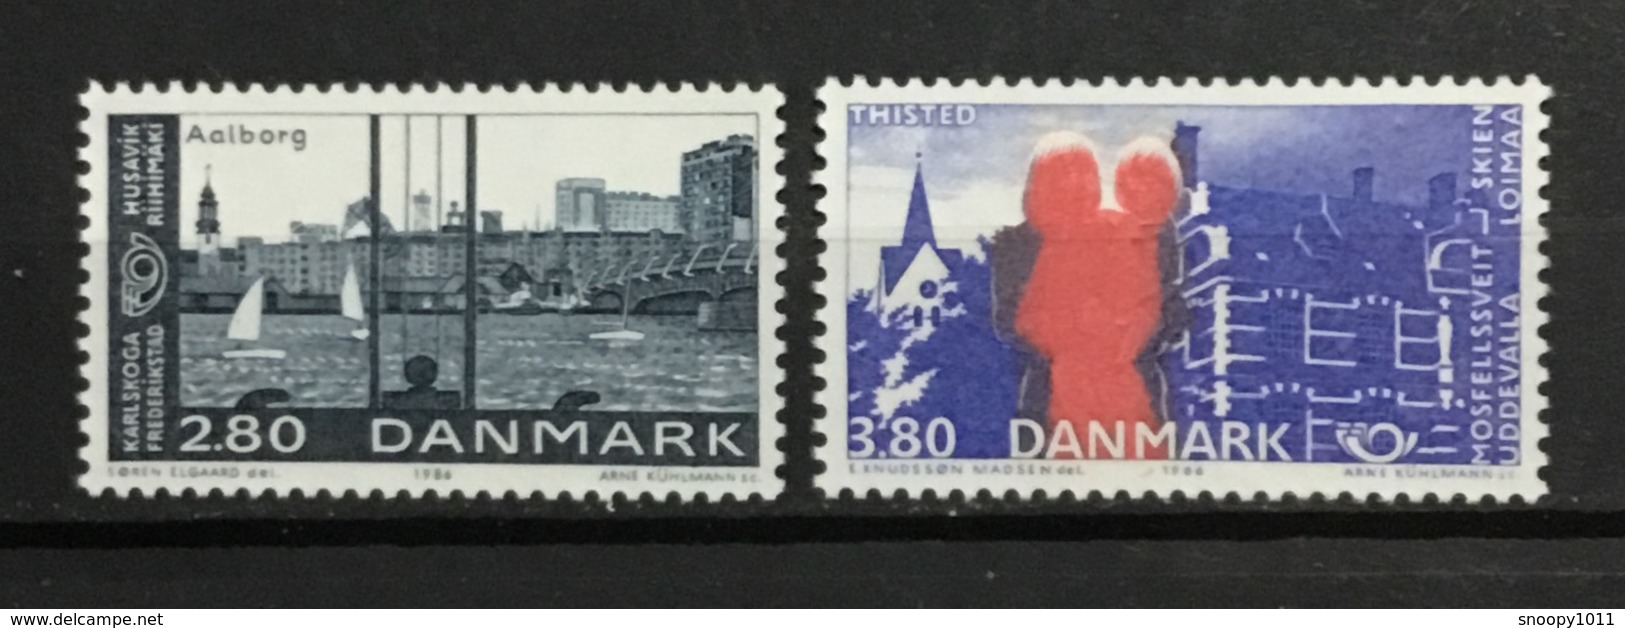 DENMARK # 819-820.  Nordic Cooperation Year - Sister Cities.  MNH (**) - Unused Stamps